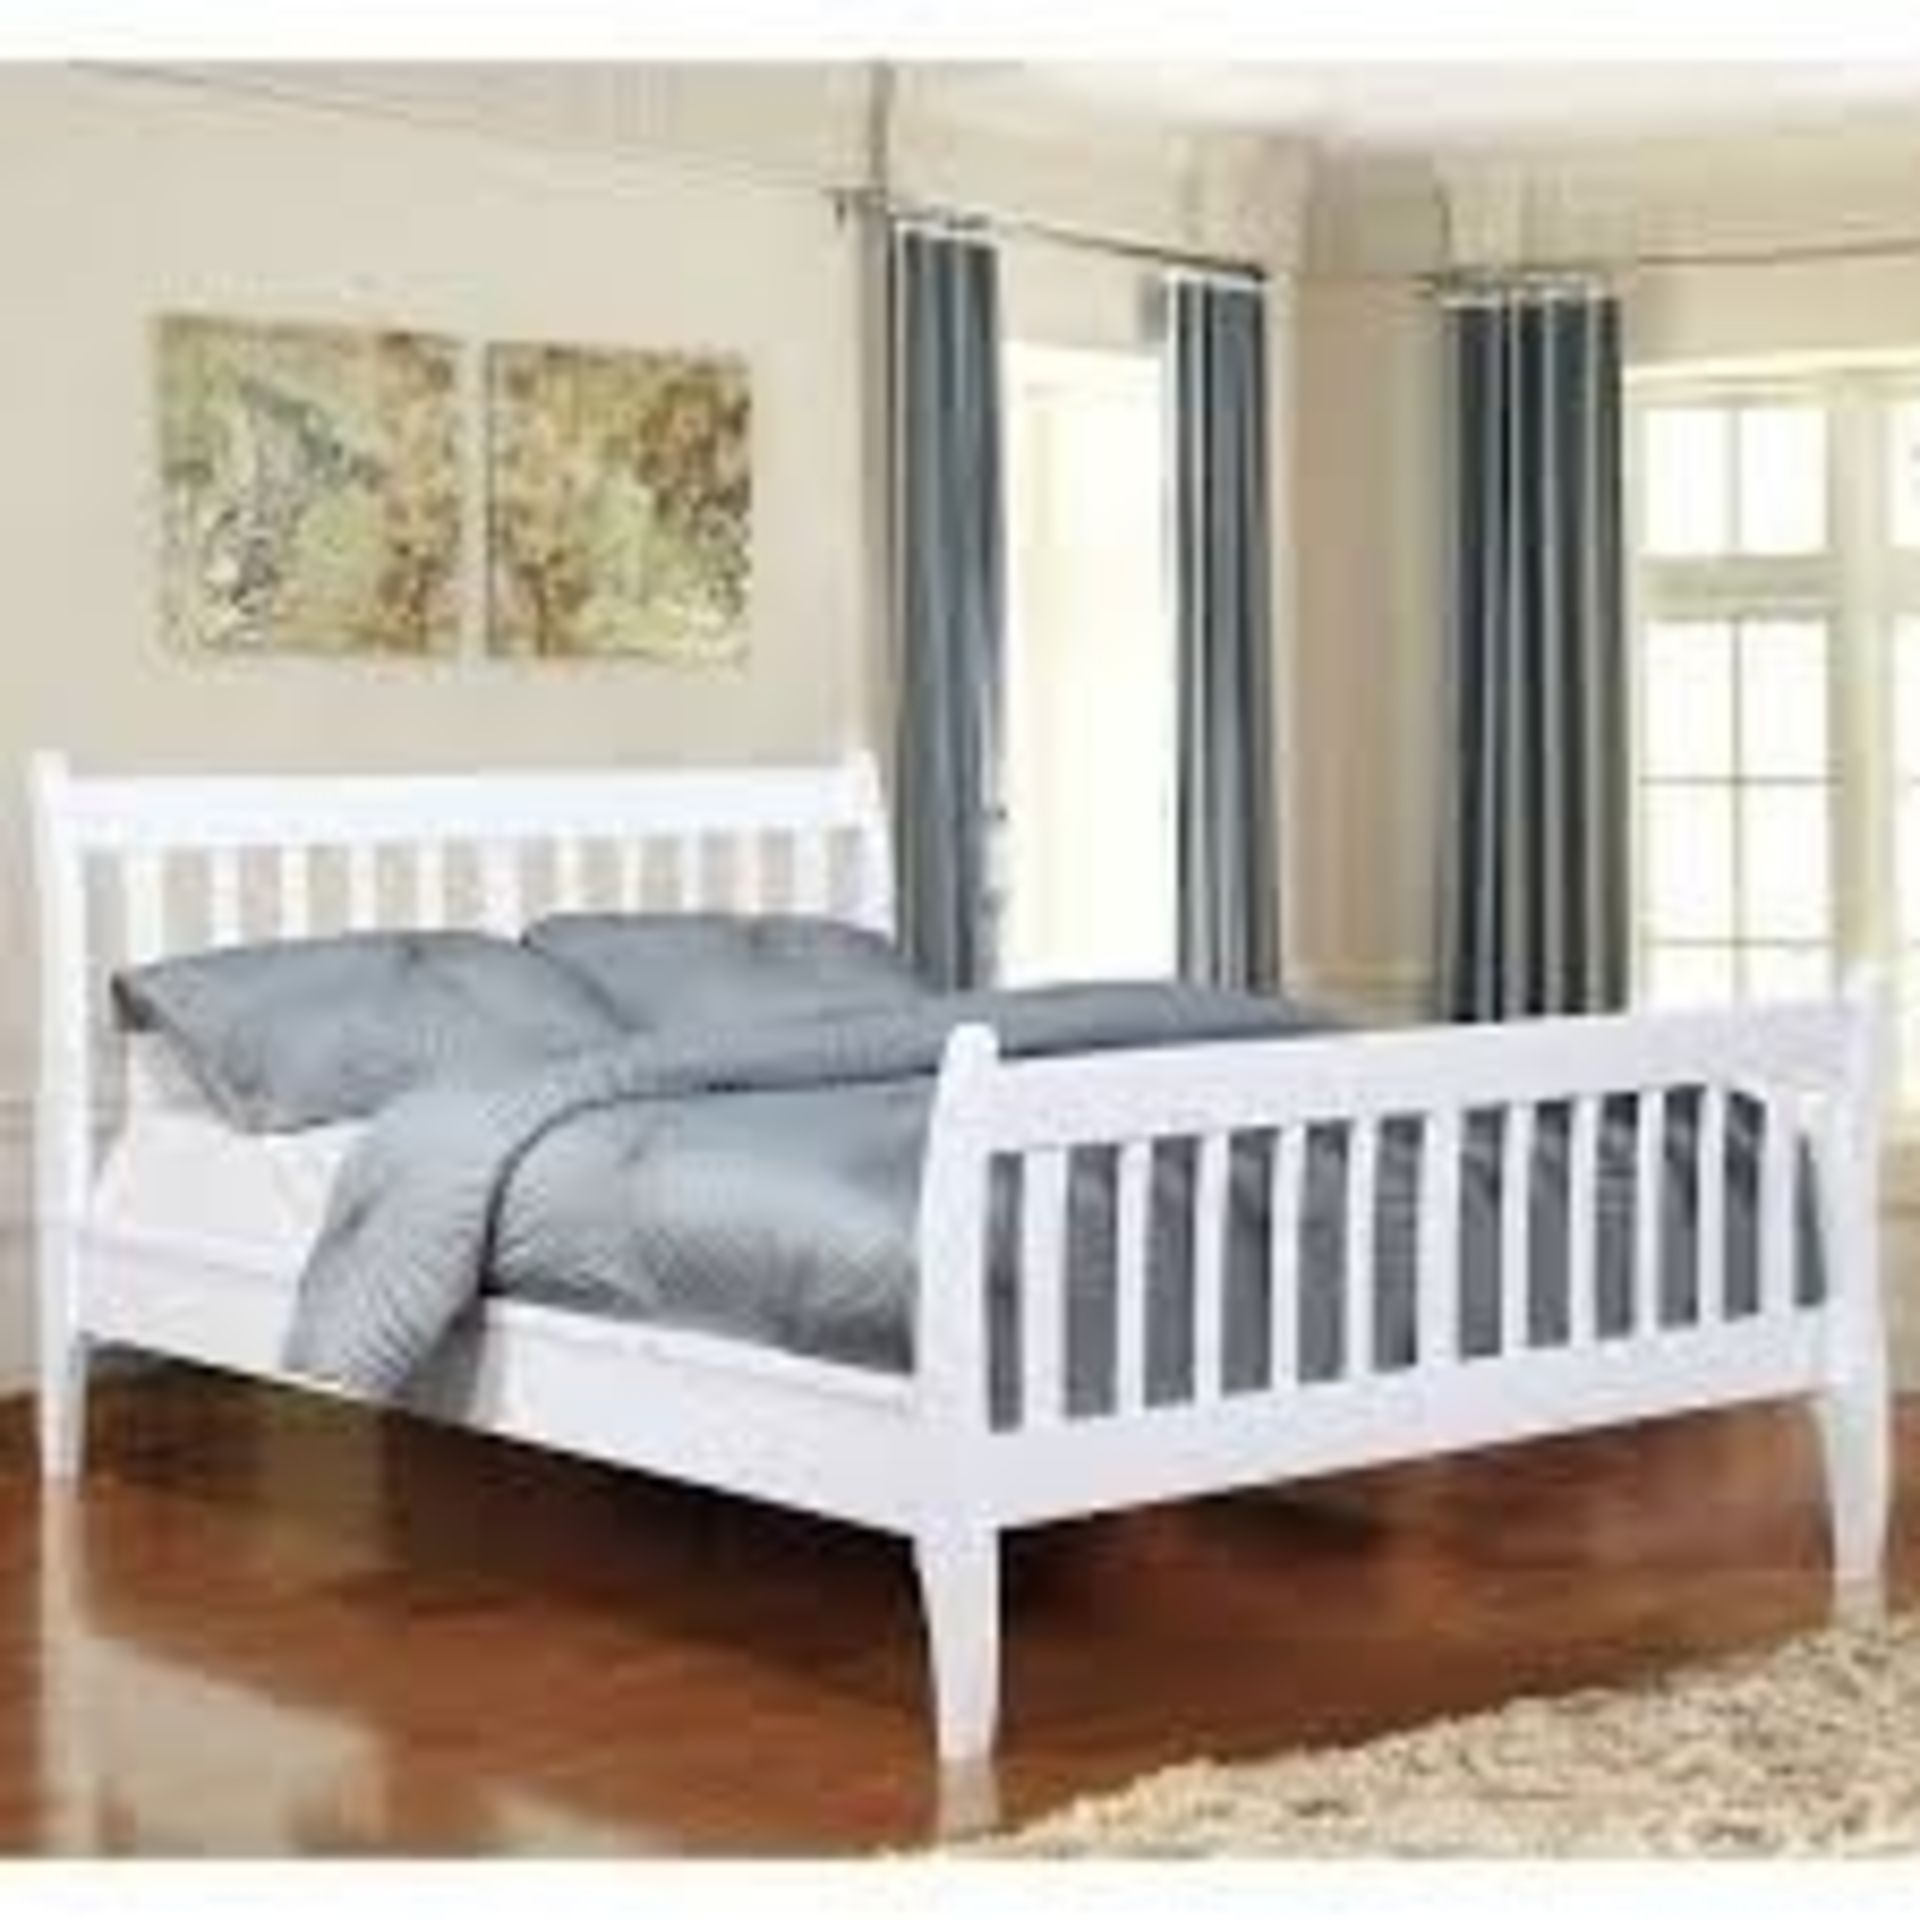 Brand New and Boxed Single Nicolas Bed (White) RRP